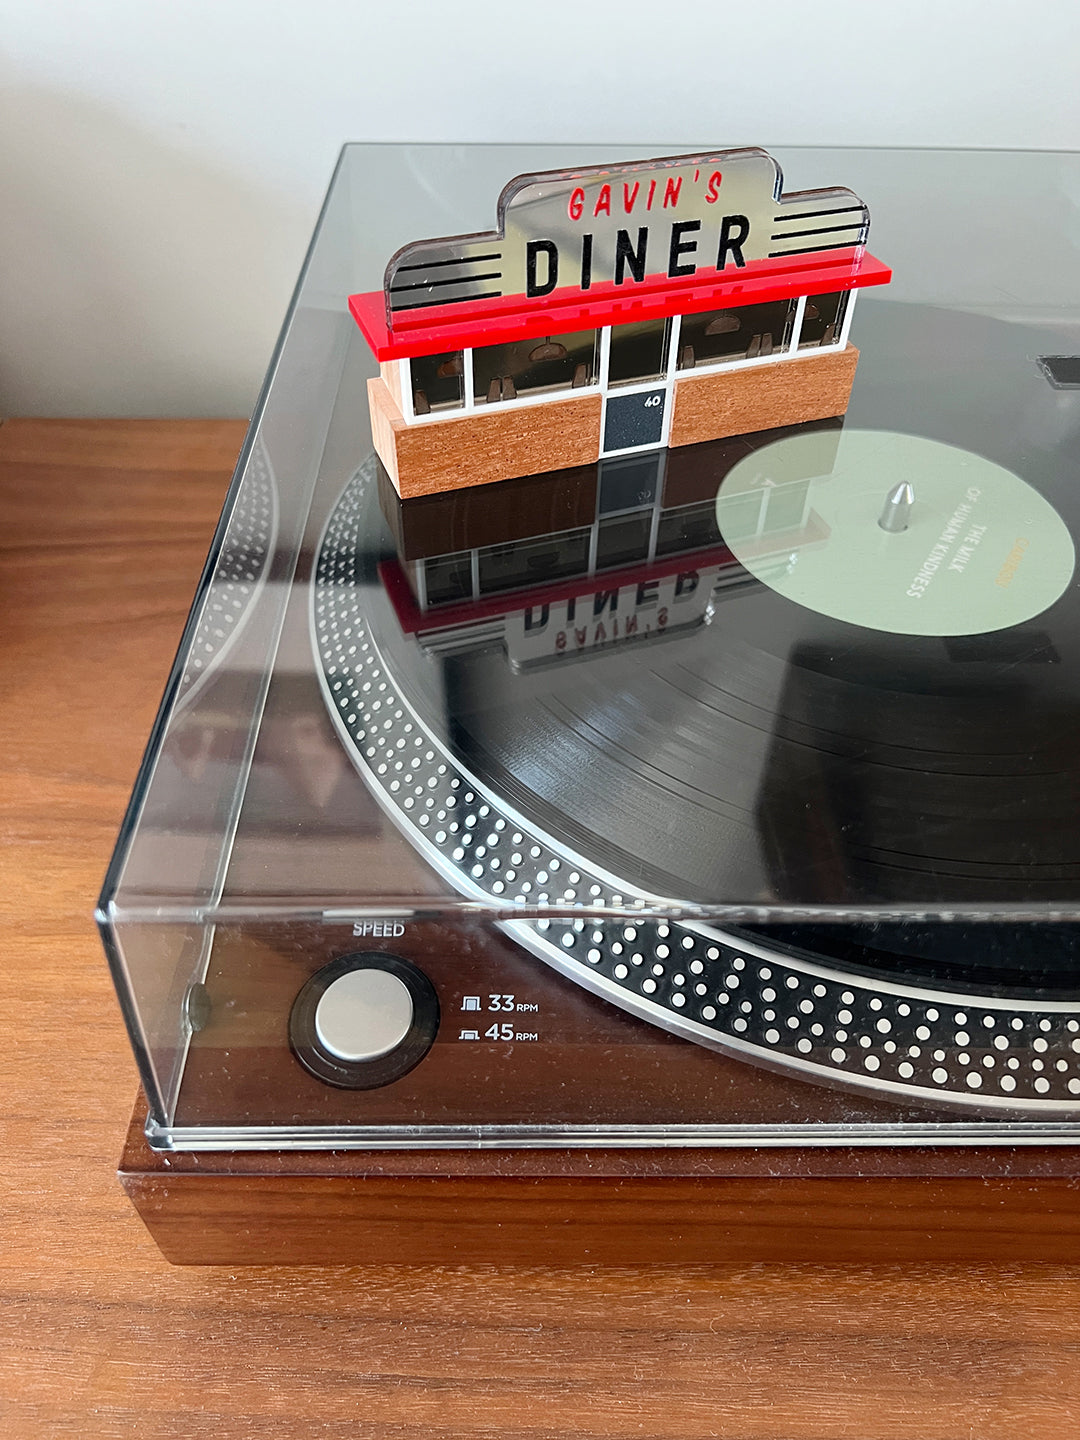 A miniature American diner ornament, photographed on top of a vinyl turntable